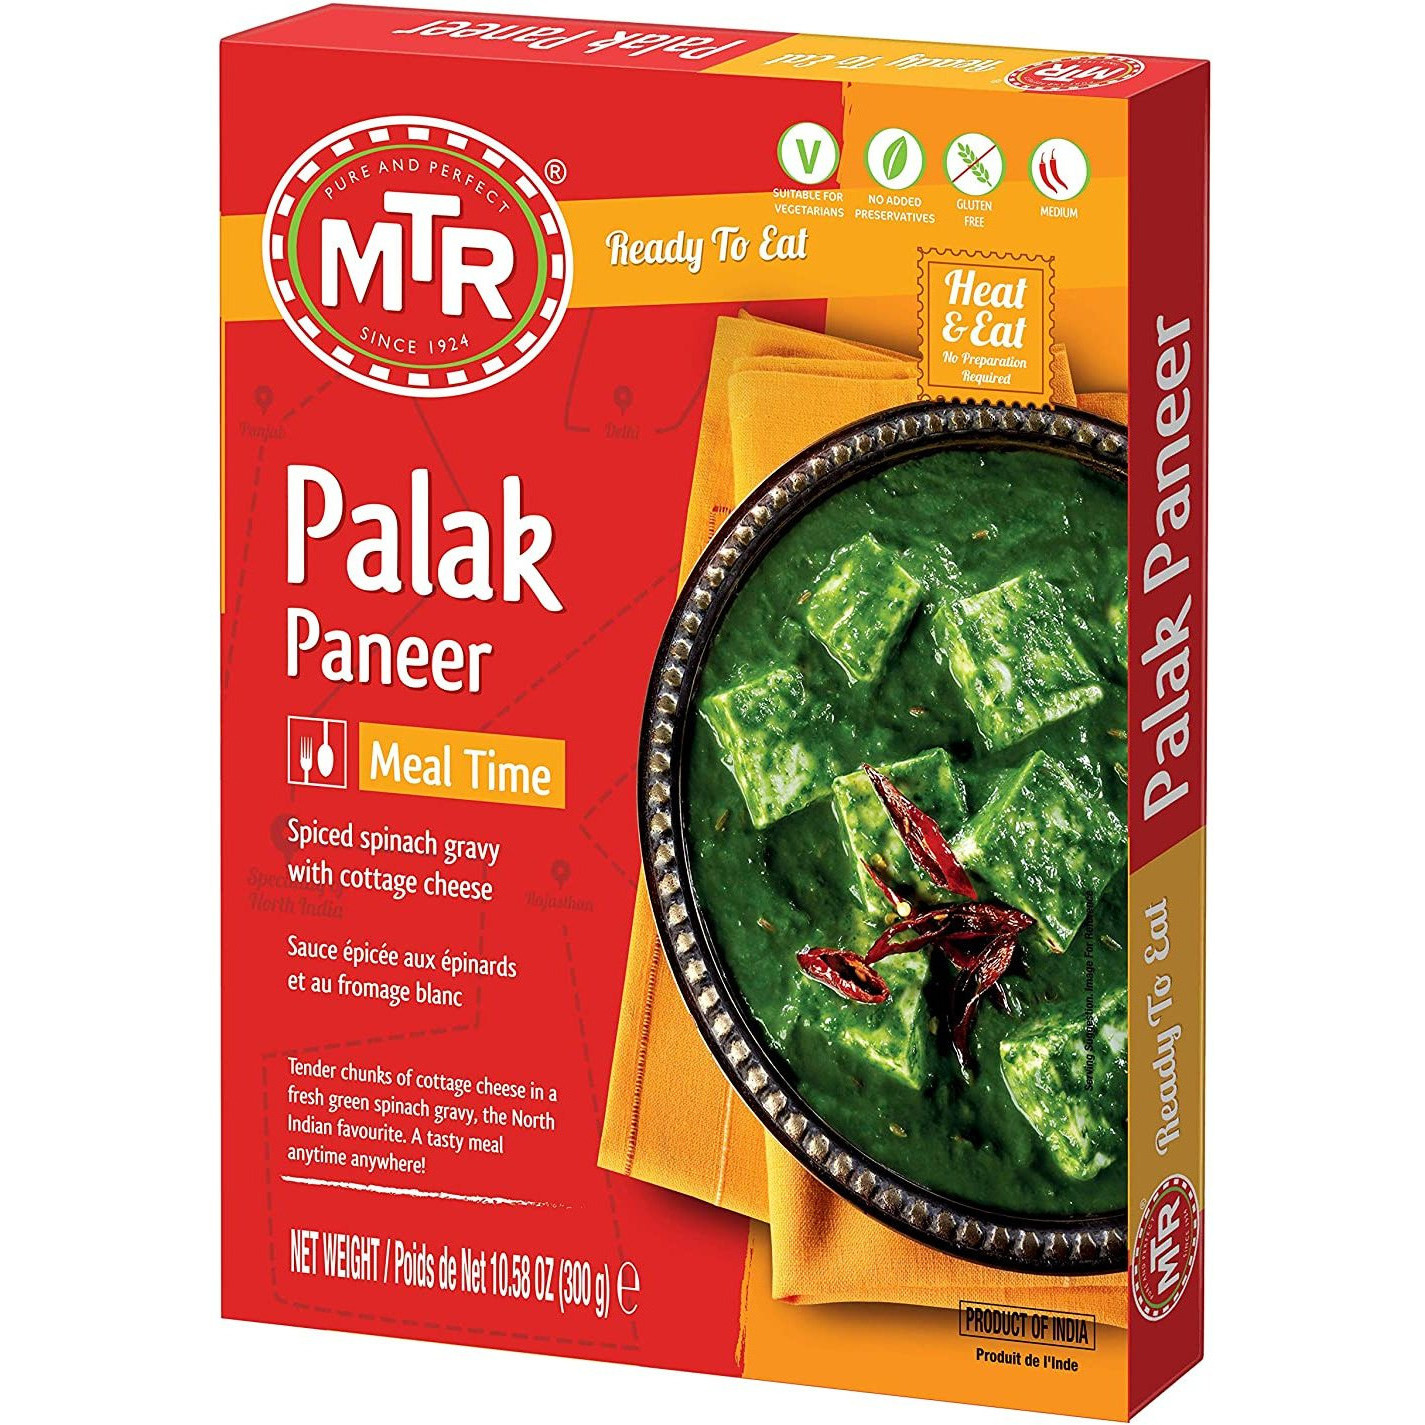 Pack of 2 - Mtr Ready To Eat Palak Paneer - 300 Gm (10.5 Oz)